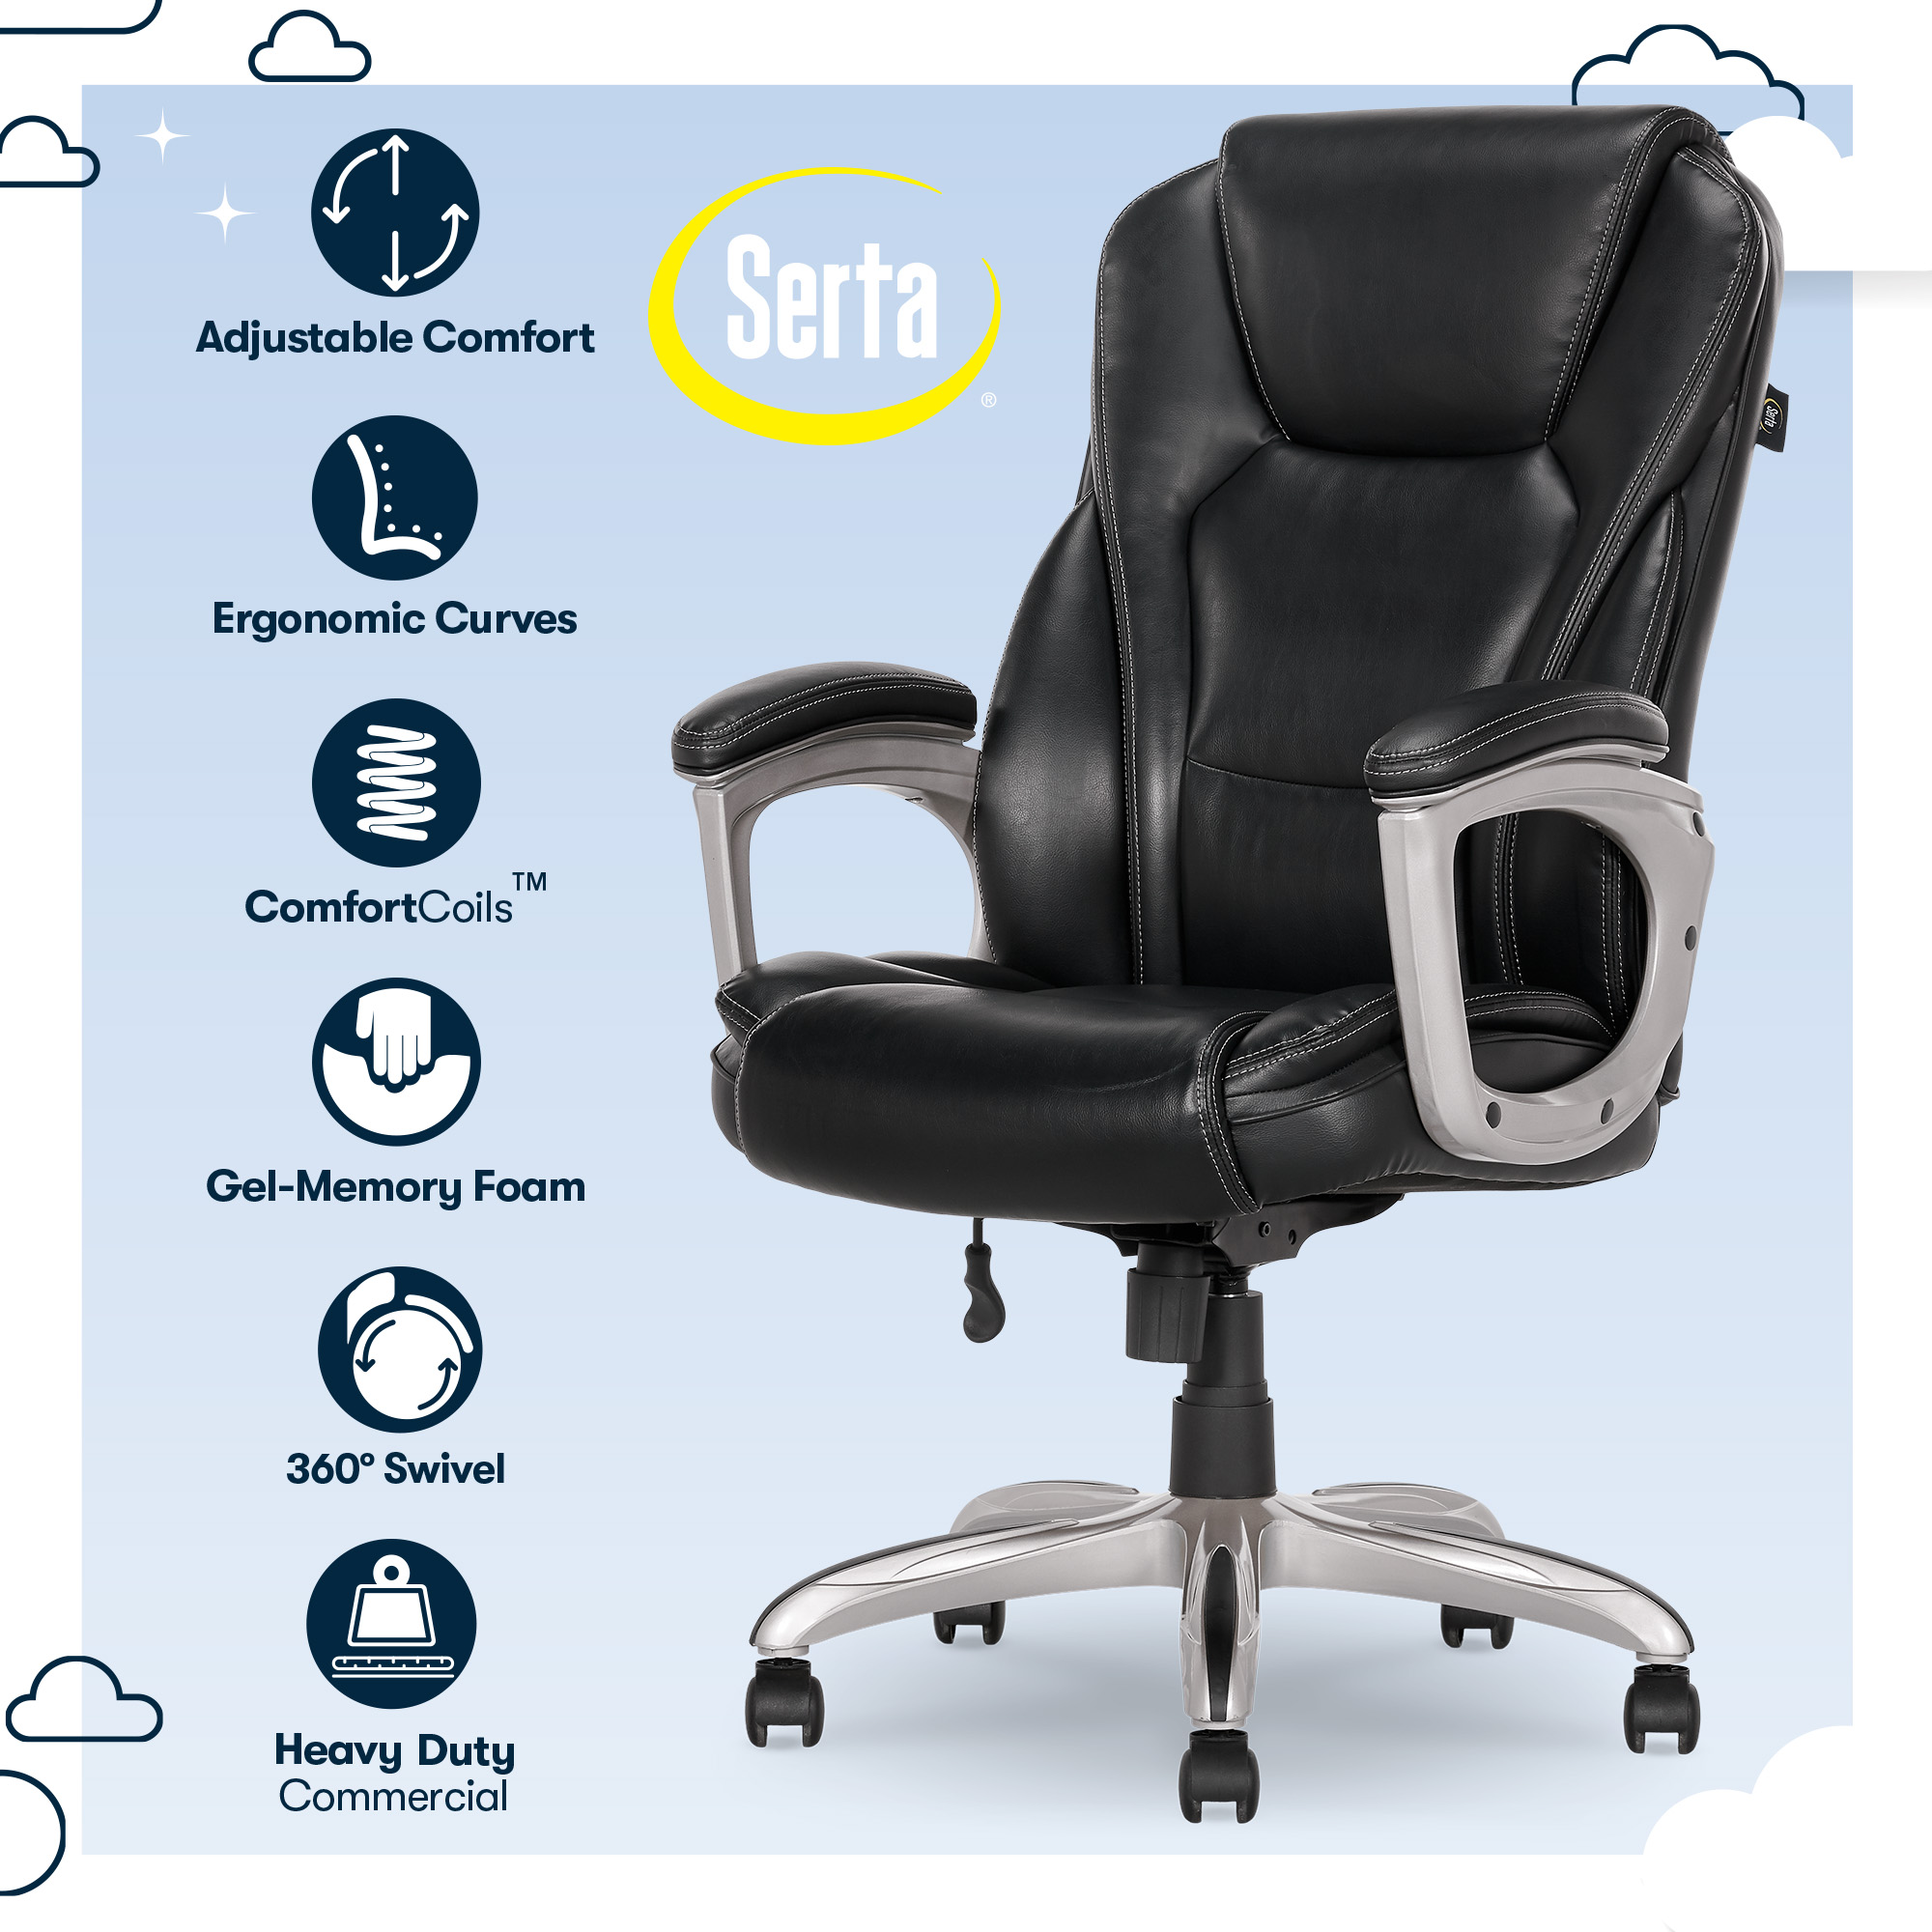 Serta Heavy-Duty Bonded Leather Commercial Office Chair with Memory Foam, 350 lb capacity, Black - image 4 of 9